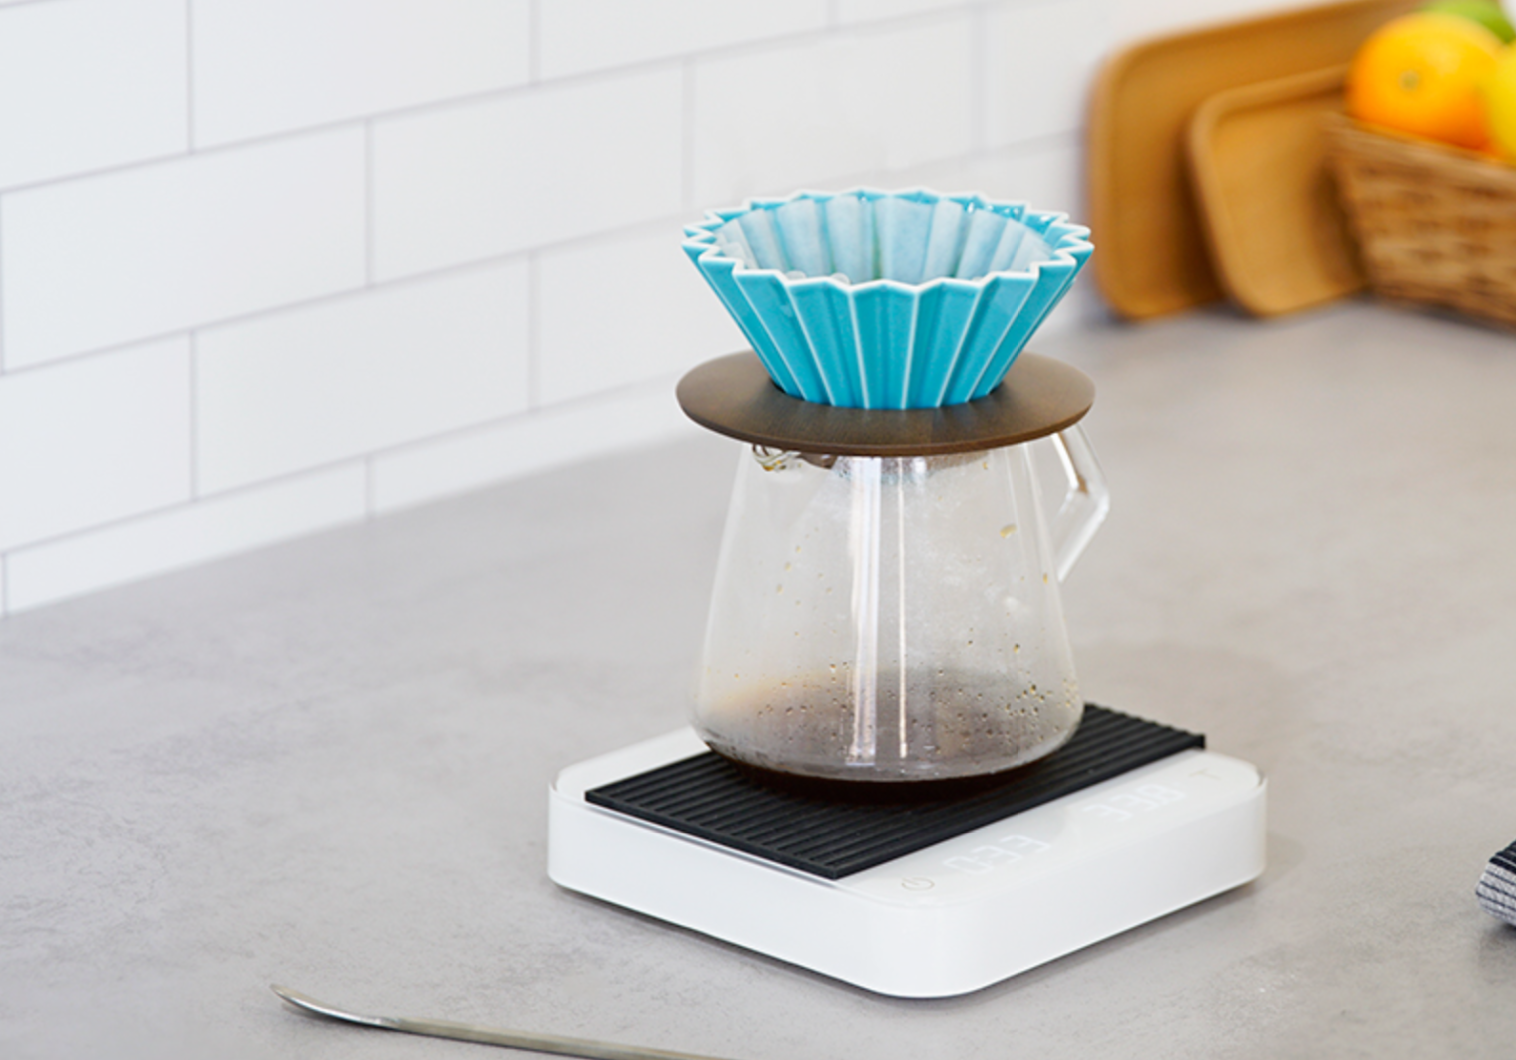 Acaia Introduces Upgrades to Pearl and Lunar ScalesDaily Coffee News by  Roast Magazine